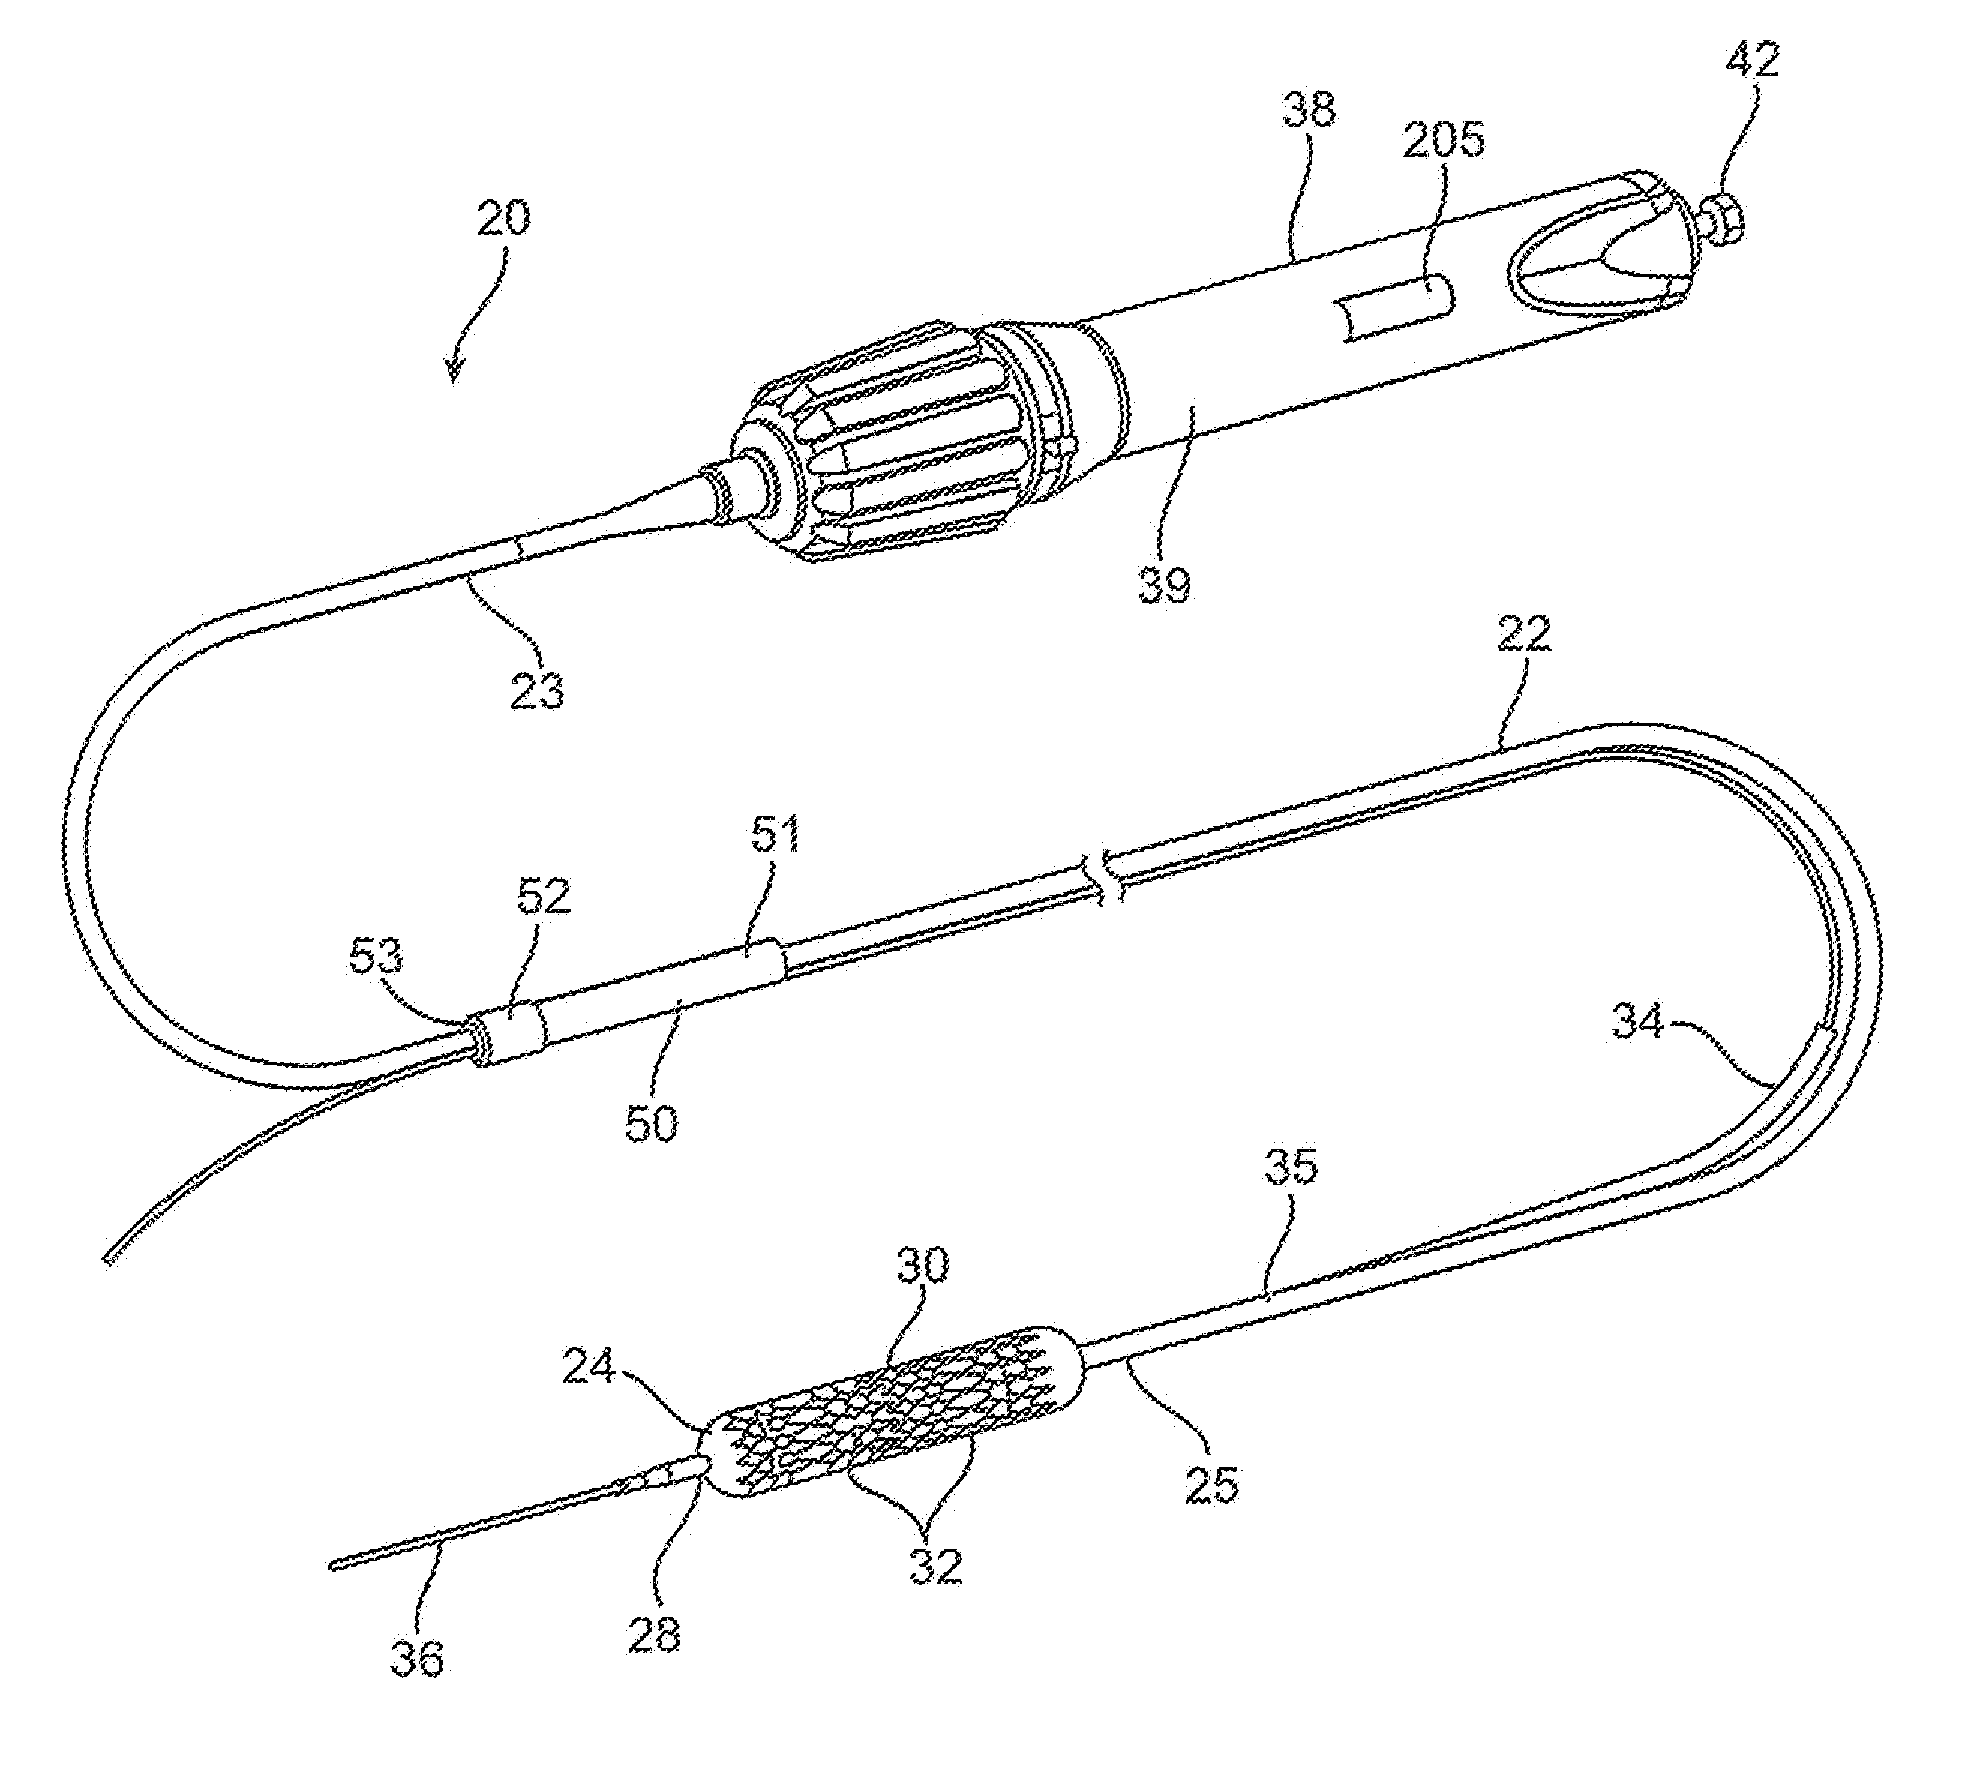 Delivery catheter having active engagement mechanism for prosthesis